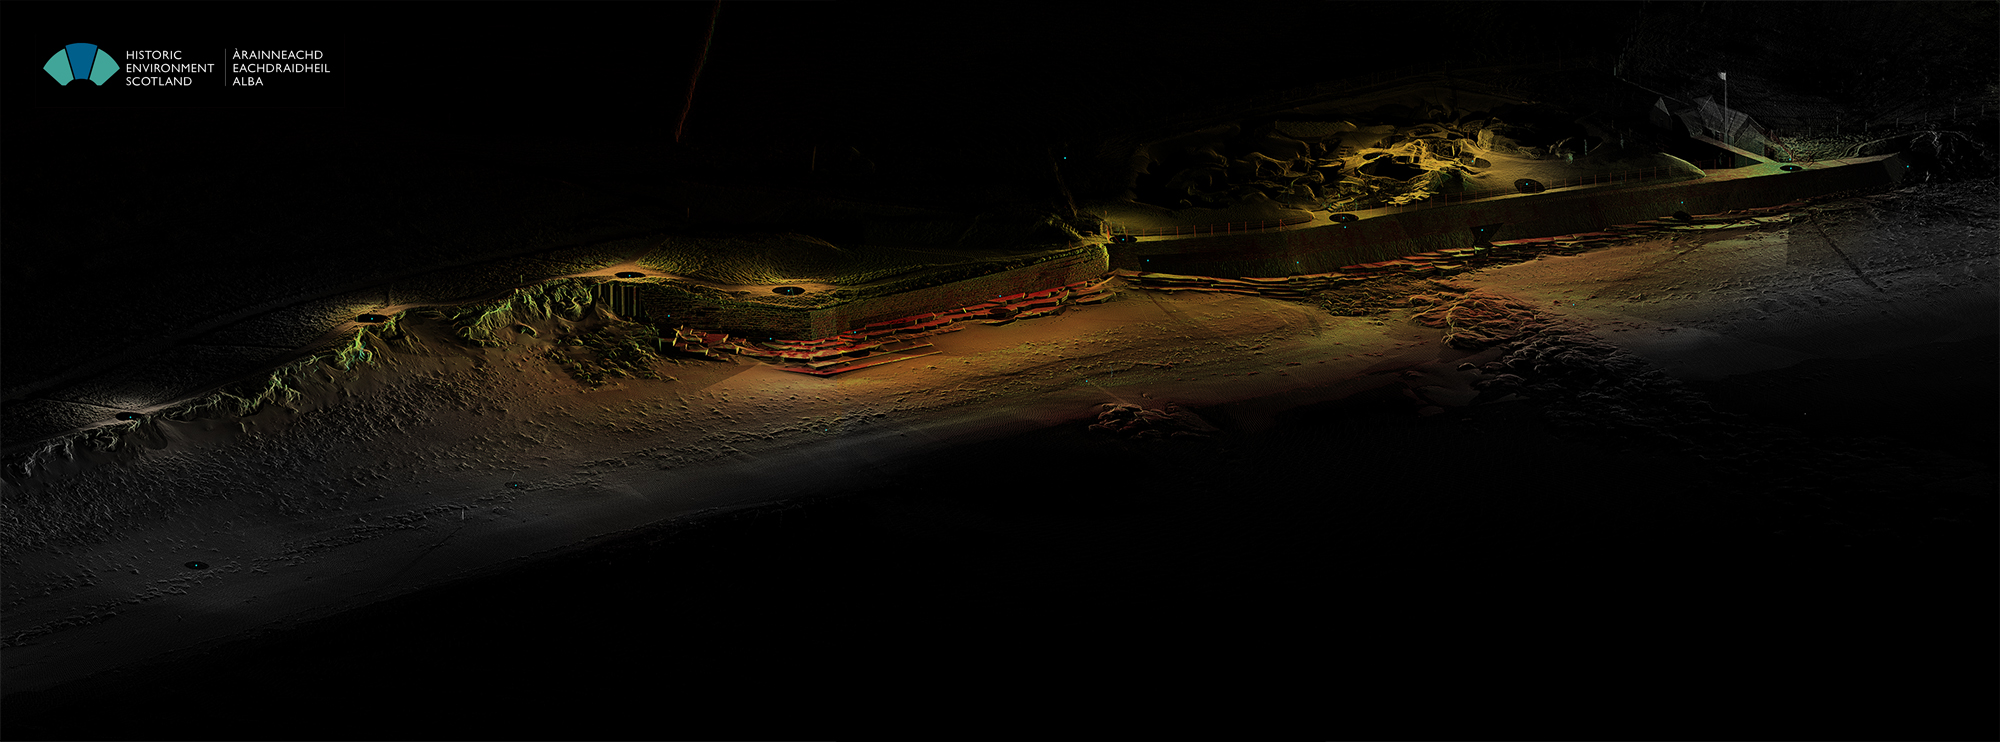 General view of the point cloud at Skara Brae from the NE, showing the protective sea wall and sand dunes to either side of it. The Neolithic village is visible at the top right part of the image.